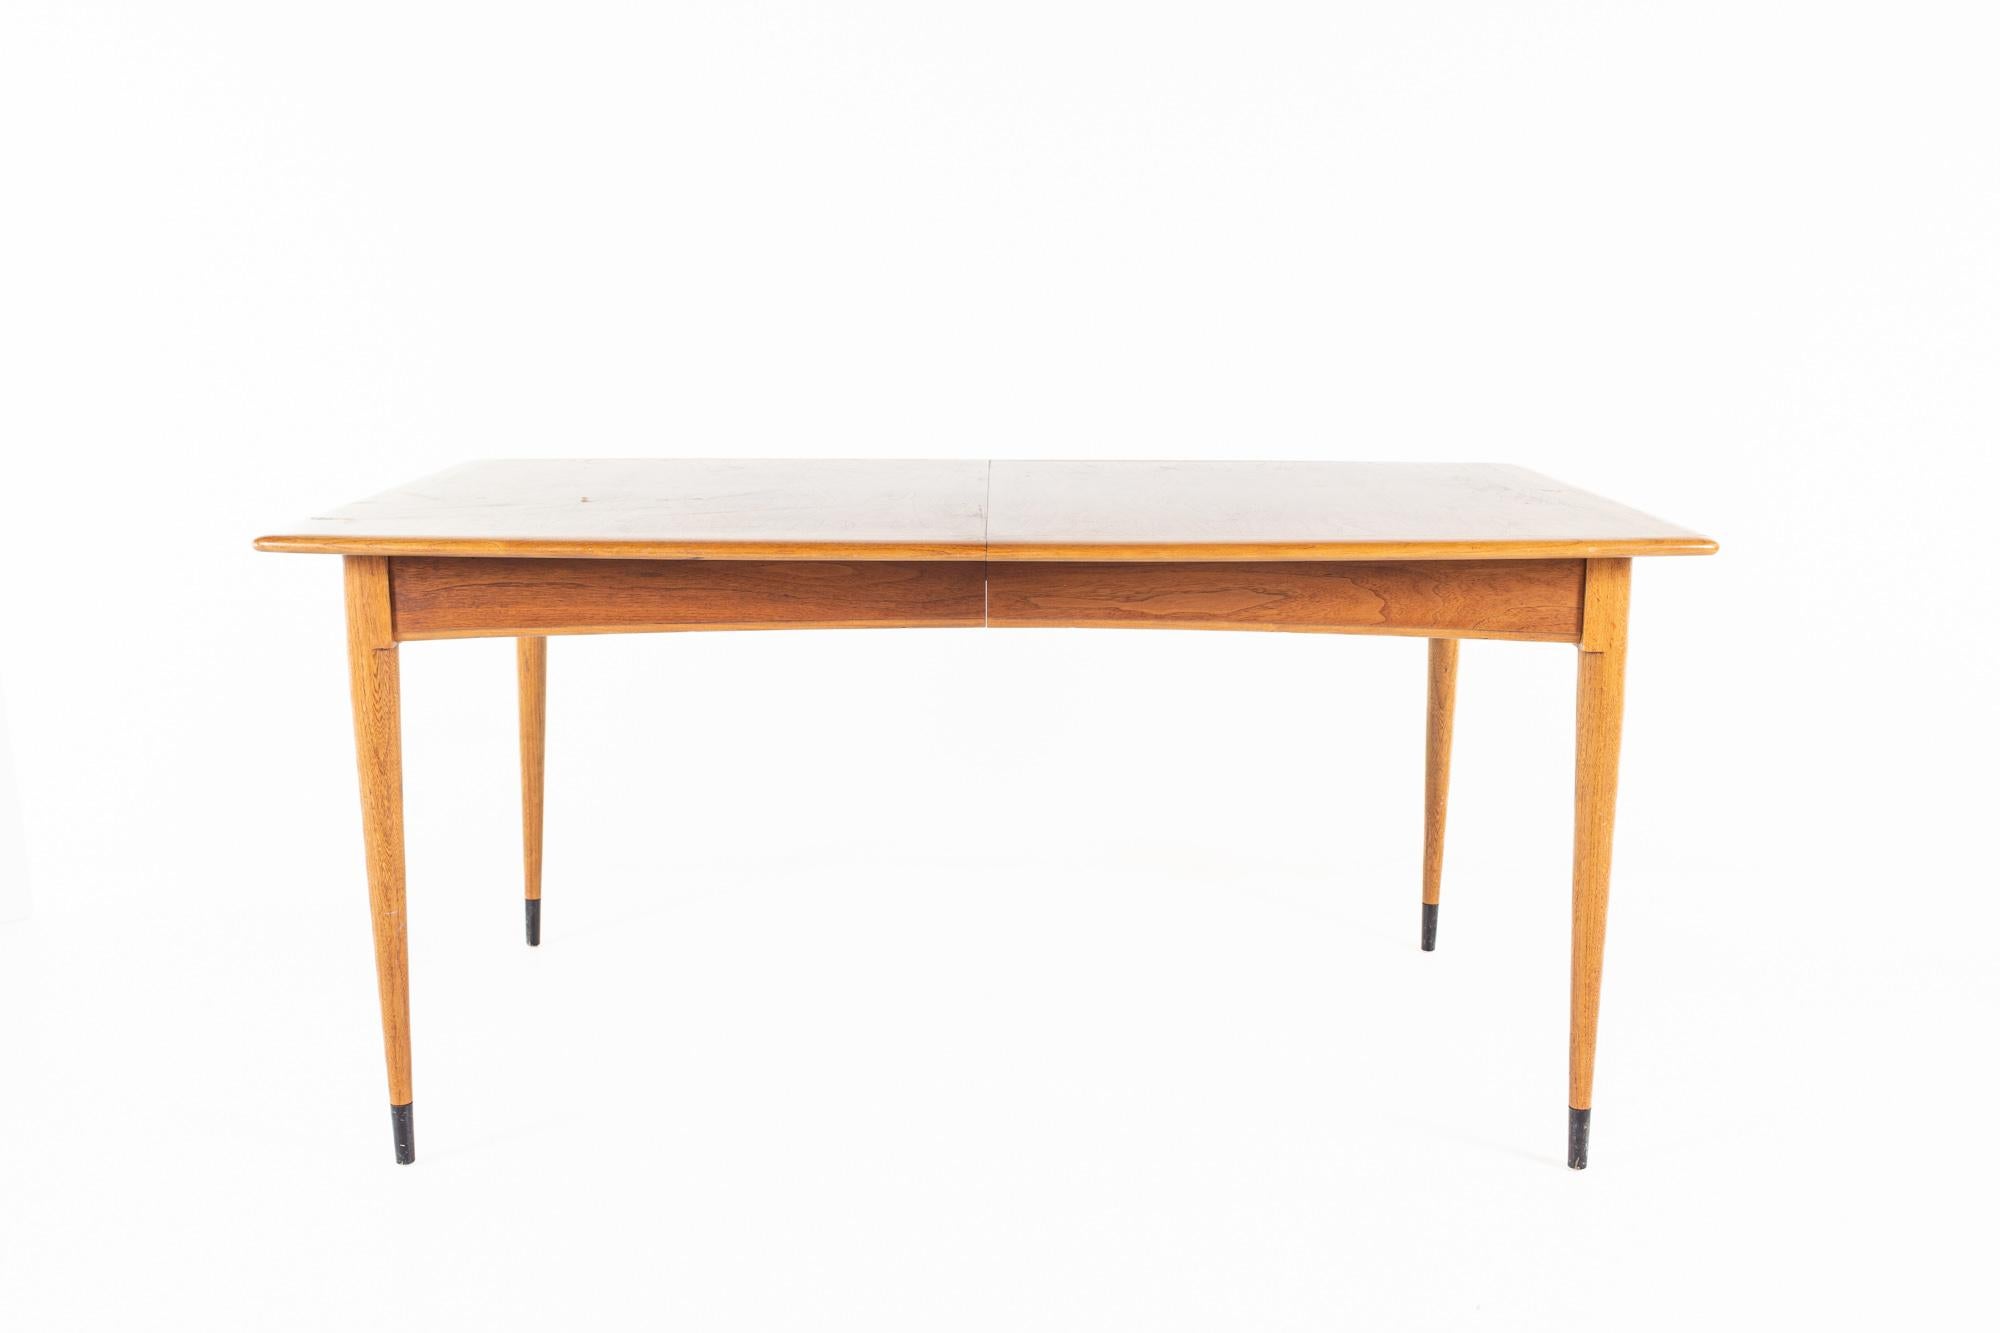 Lane Acclaim Mid Century Dovetail dining table

The table measures: 61.5 wide x 38 deep x 29 high, with a chair clearance of 25 inches 

All pieces of furniture can be had in what we call restored vintage condition. That means the piece is